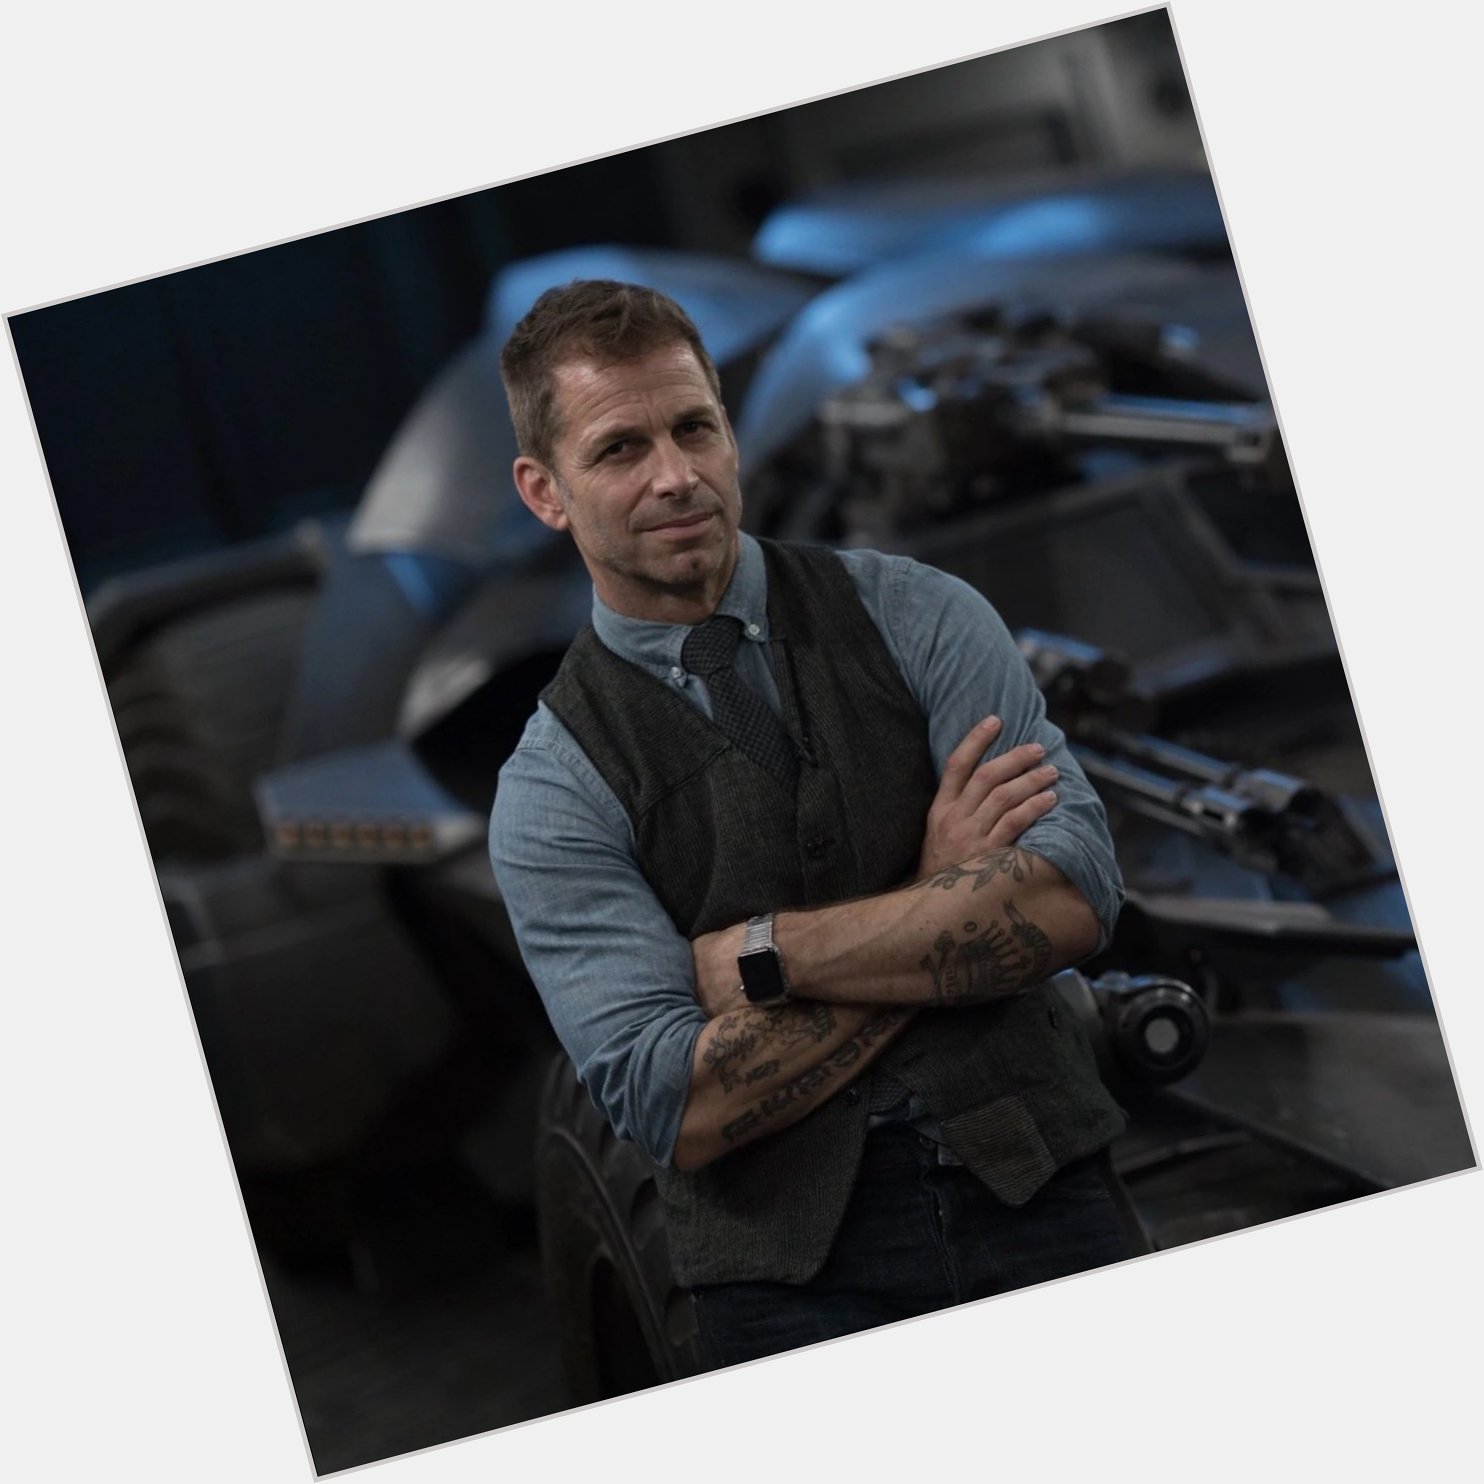 Happy birthday to the incredible Zack Snyder! 